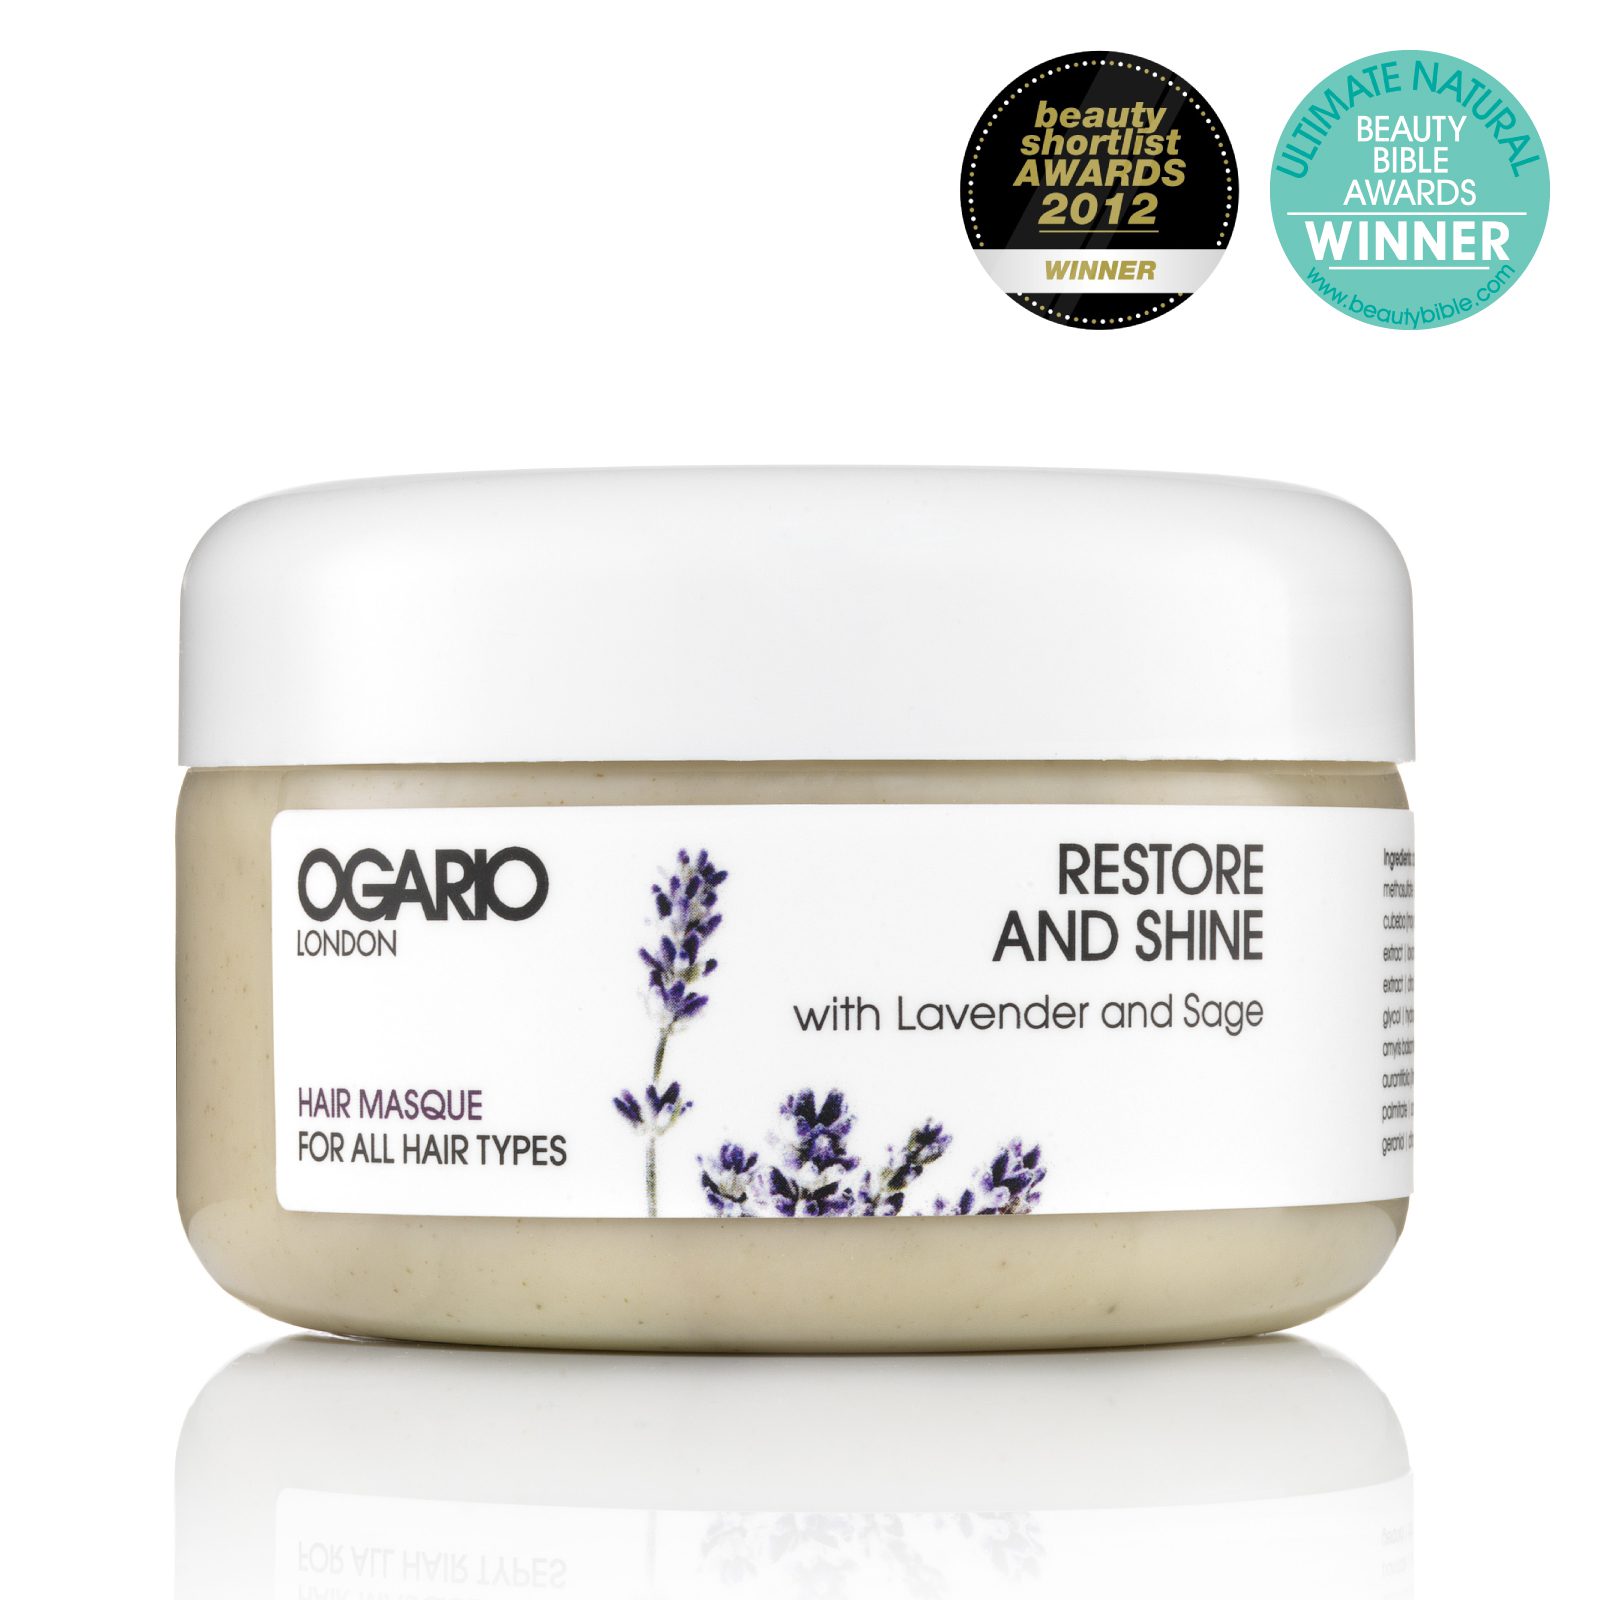 Restore and Shine Hair Masque; Add Moisture to the hair to improve volume